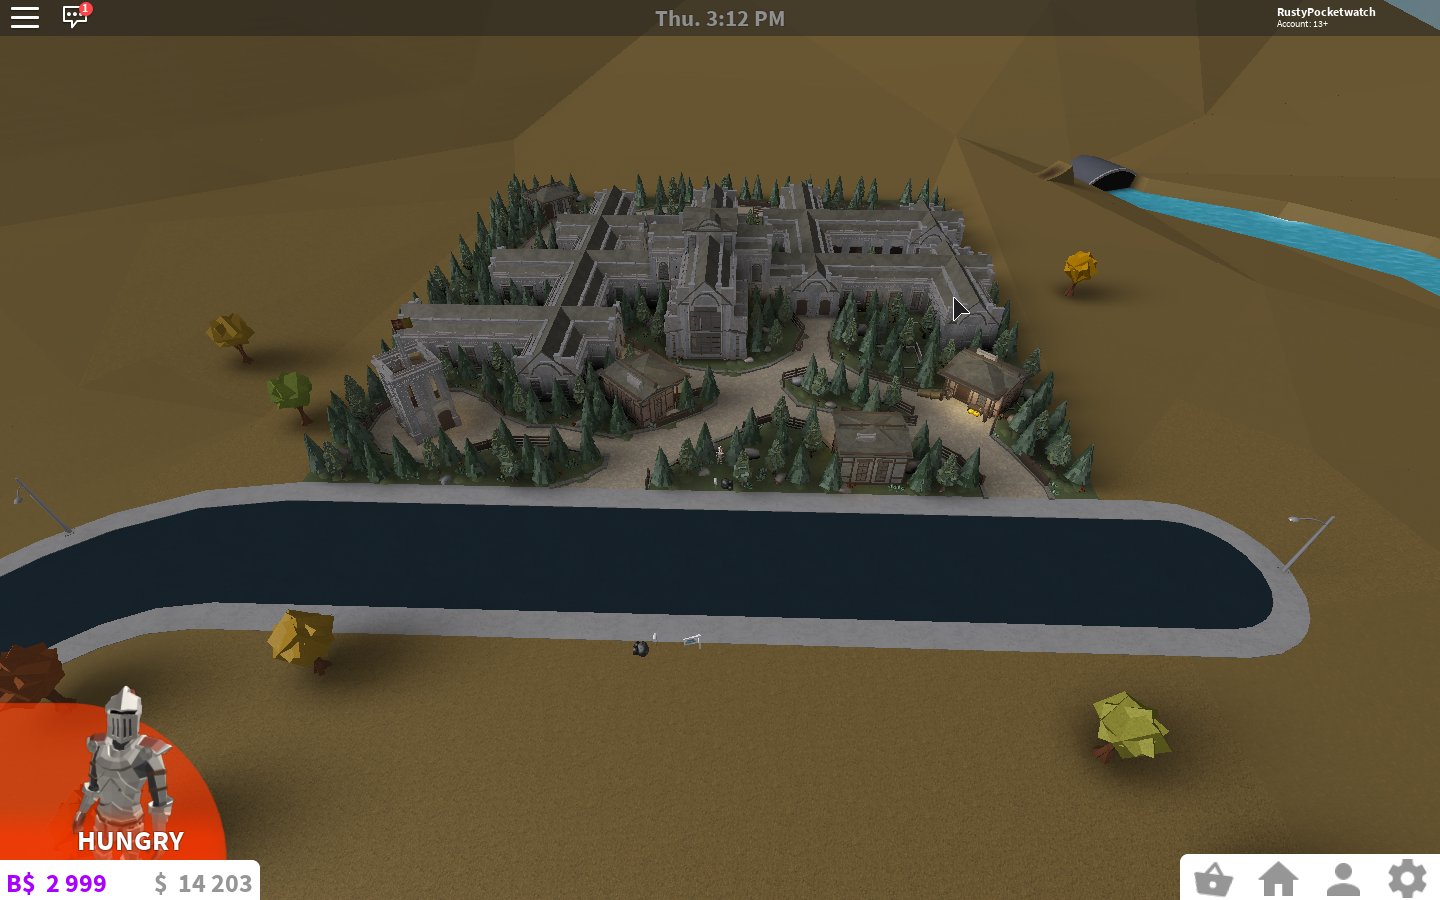 RustyPocketwatch on Twitter: "Been playing #bloxburg for over a year